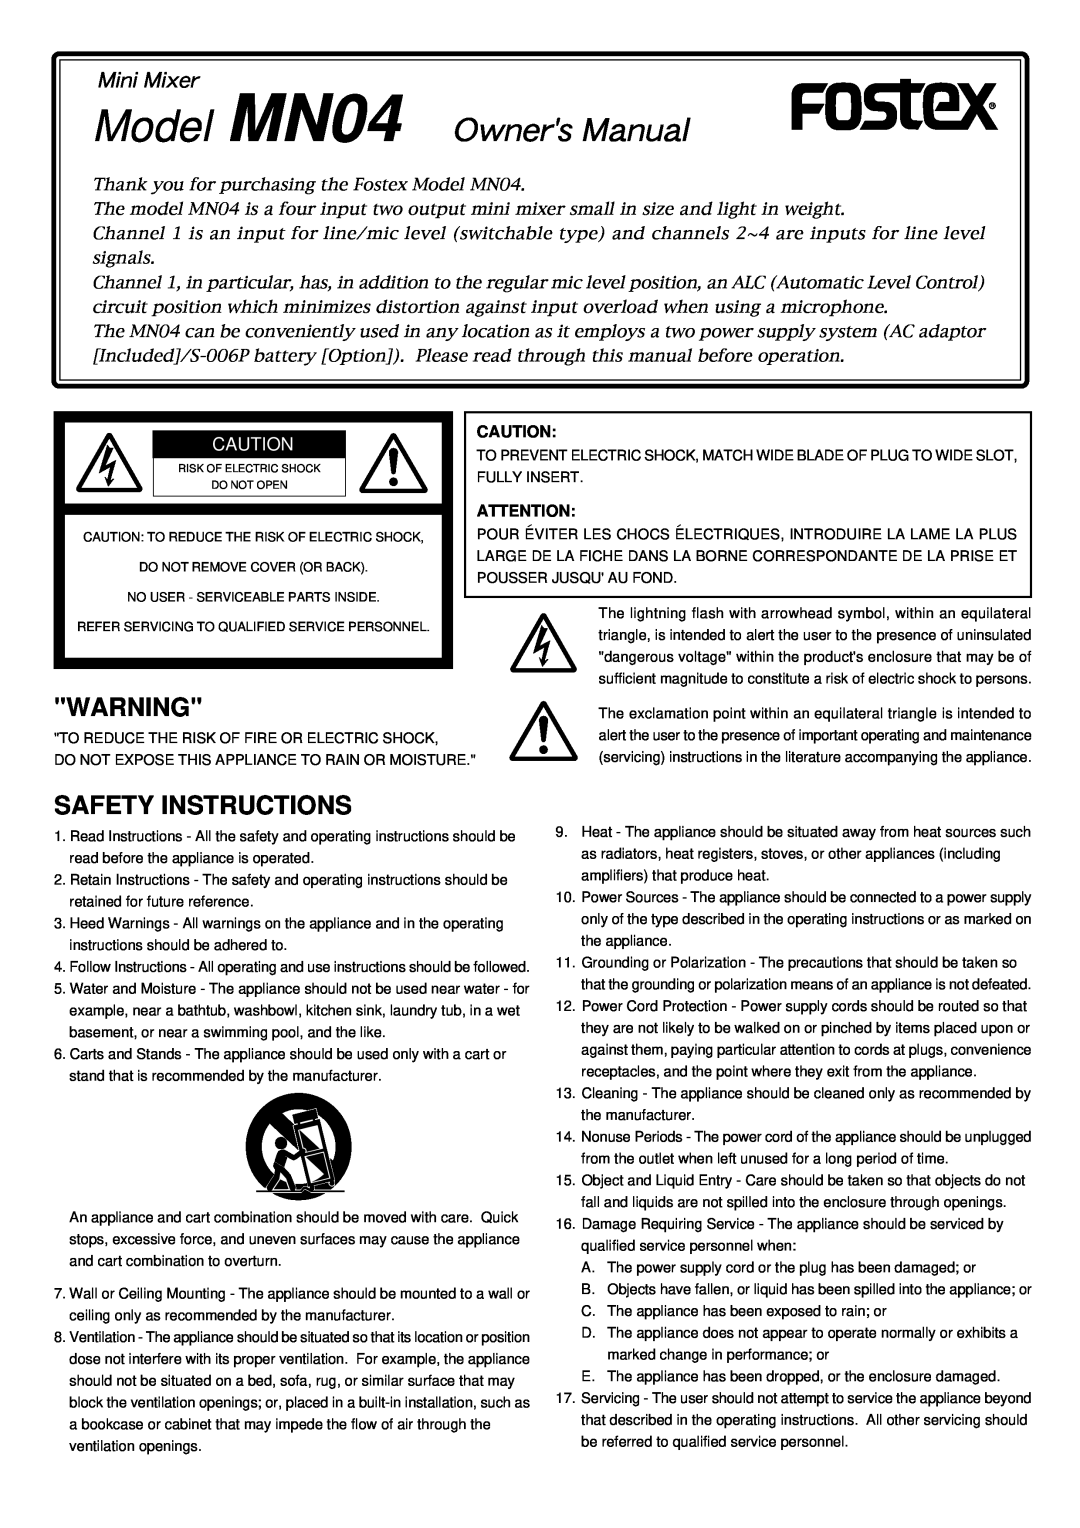 Fostex Manual MN04 owner manual Safety Instructions, Mini Mixer 